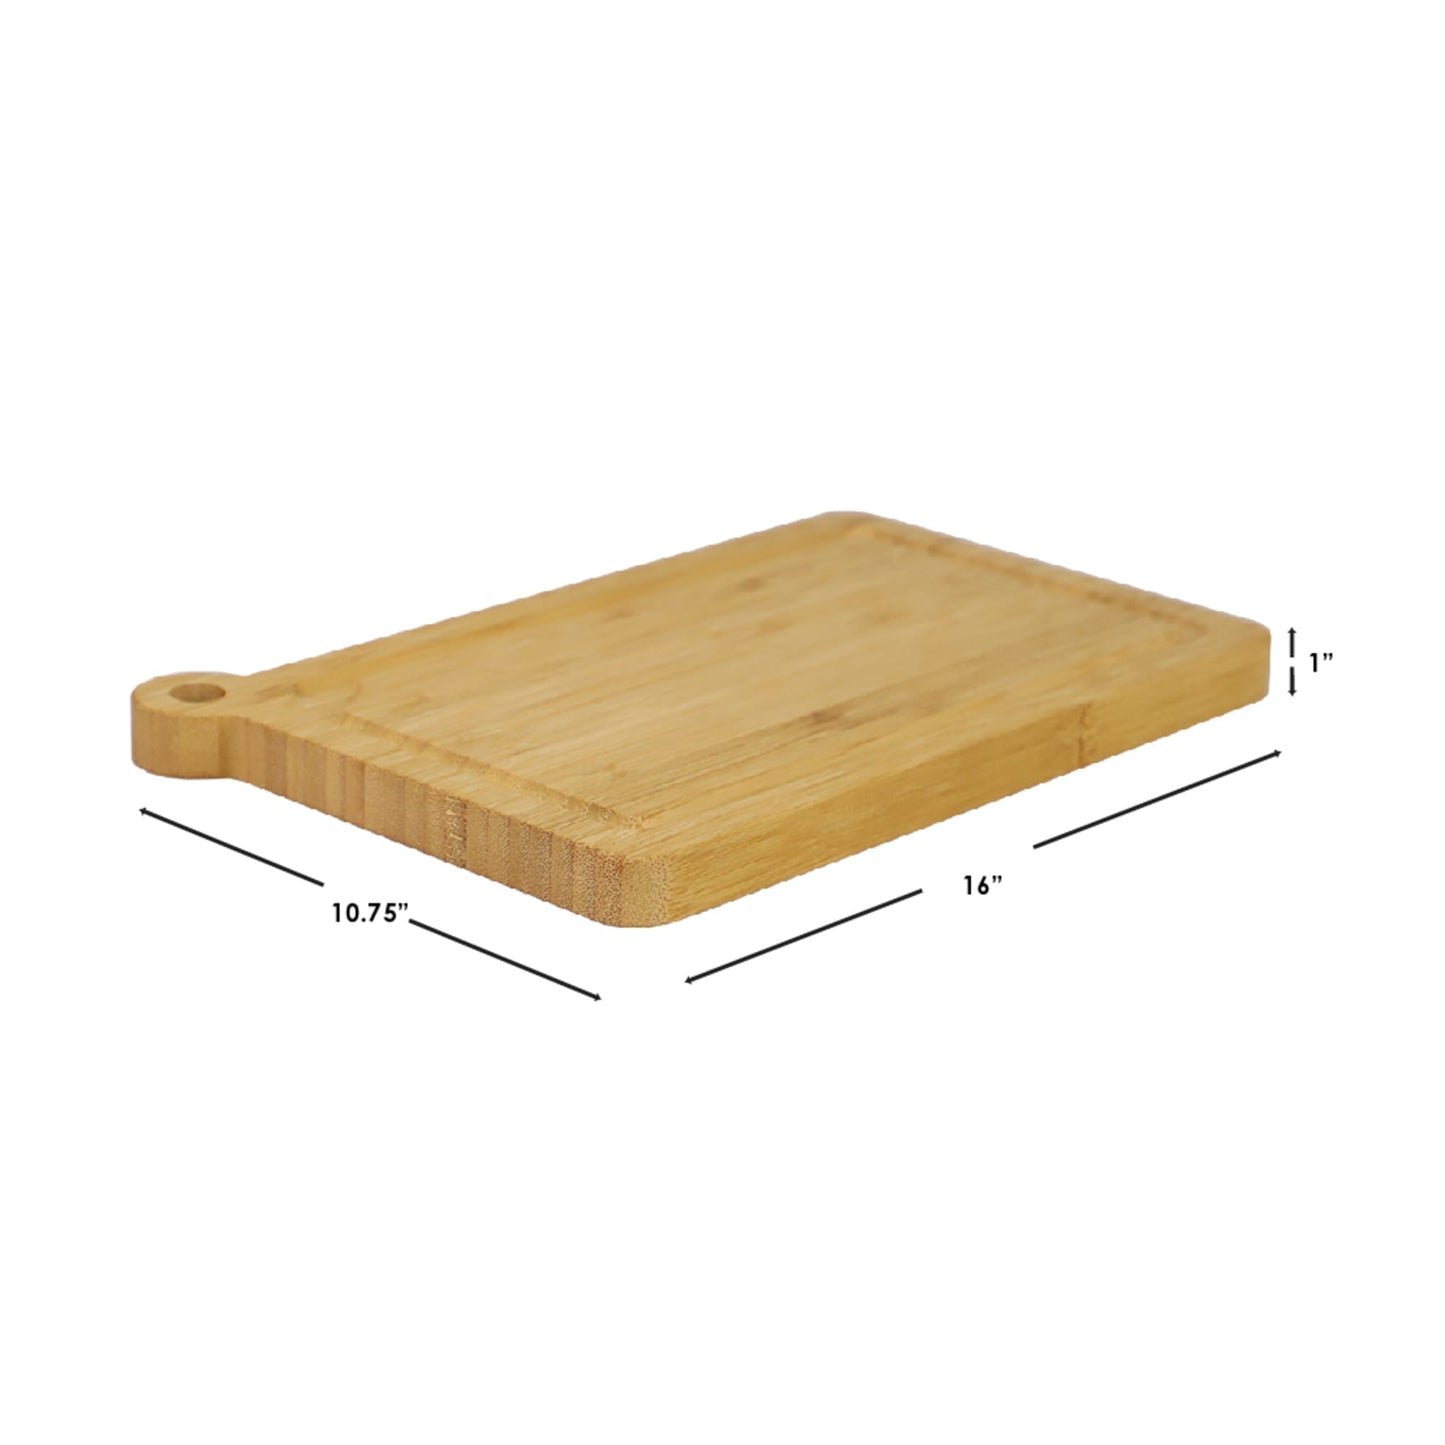 Bamboo Cutting Board With Handle, 12 X 16 – Michael Graves Design